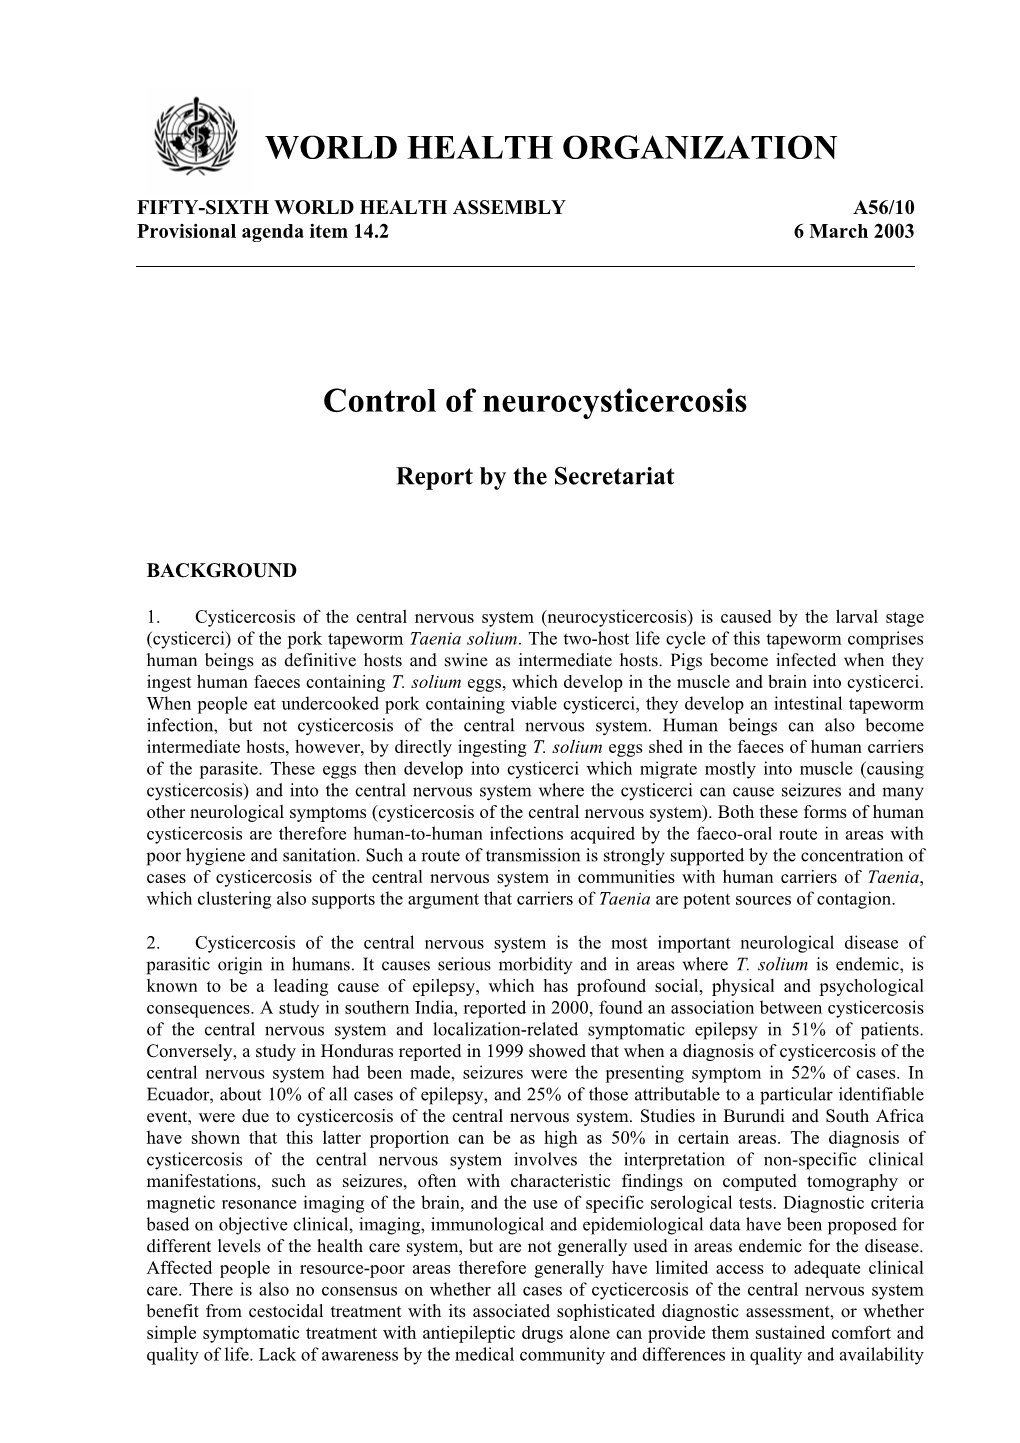 Control of Neurocysticercosis